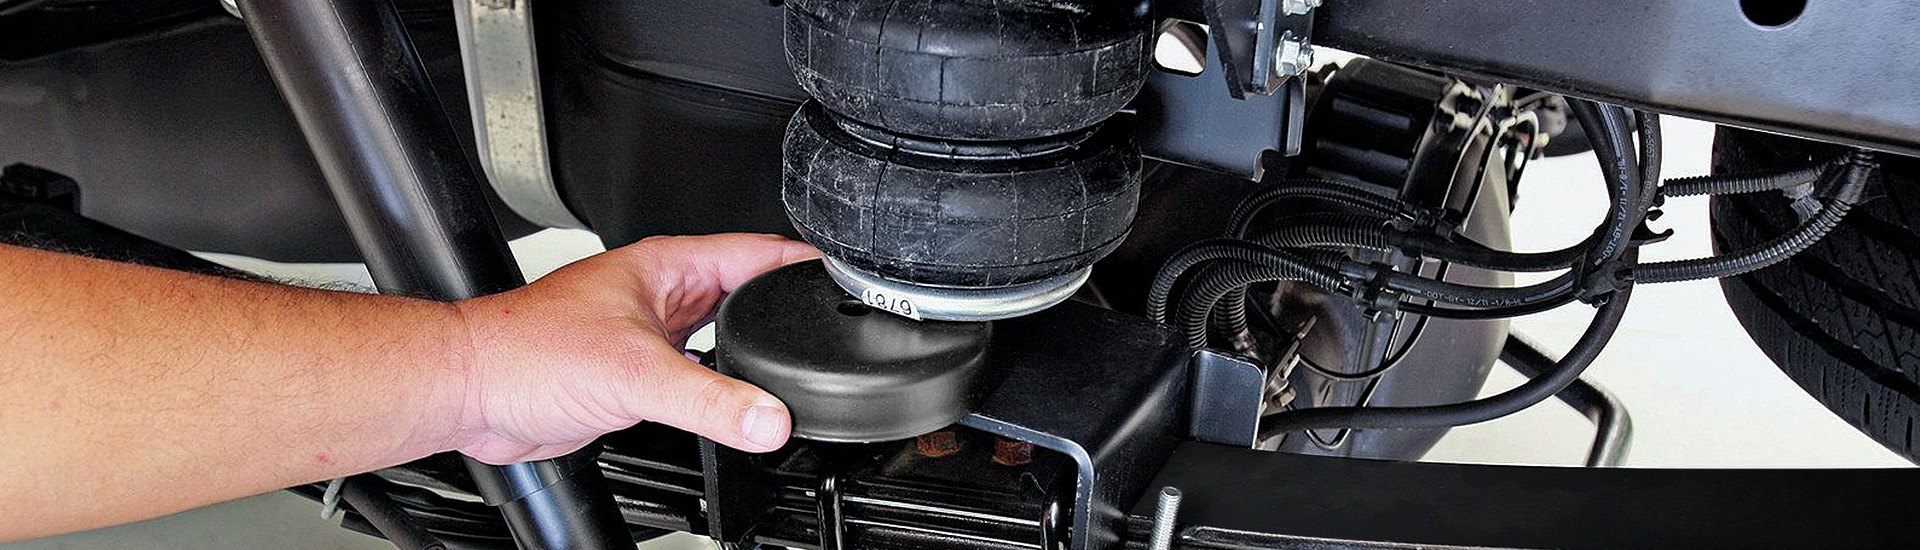 Suspension Lifts vs. Body Lifts: How To Choose The Right Lift Kit For Your  Truck